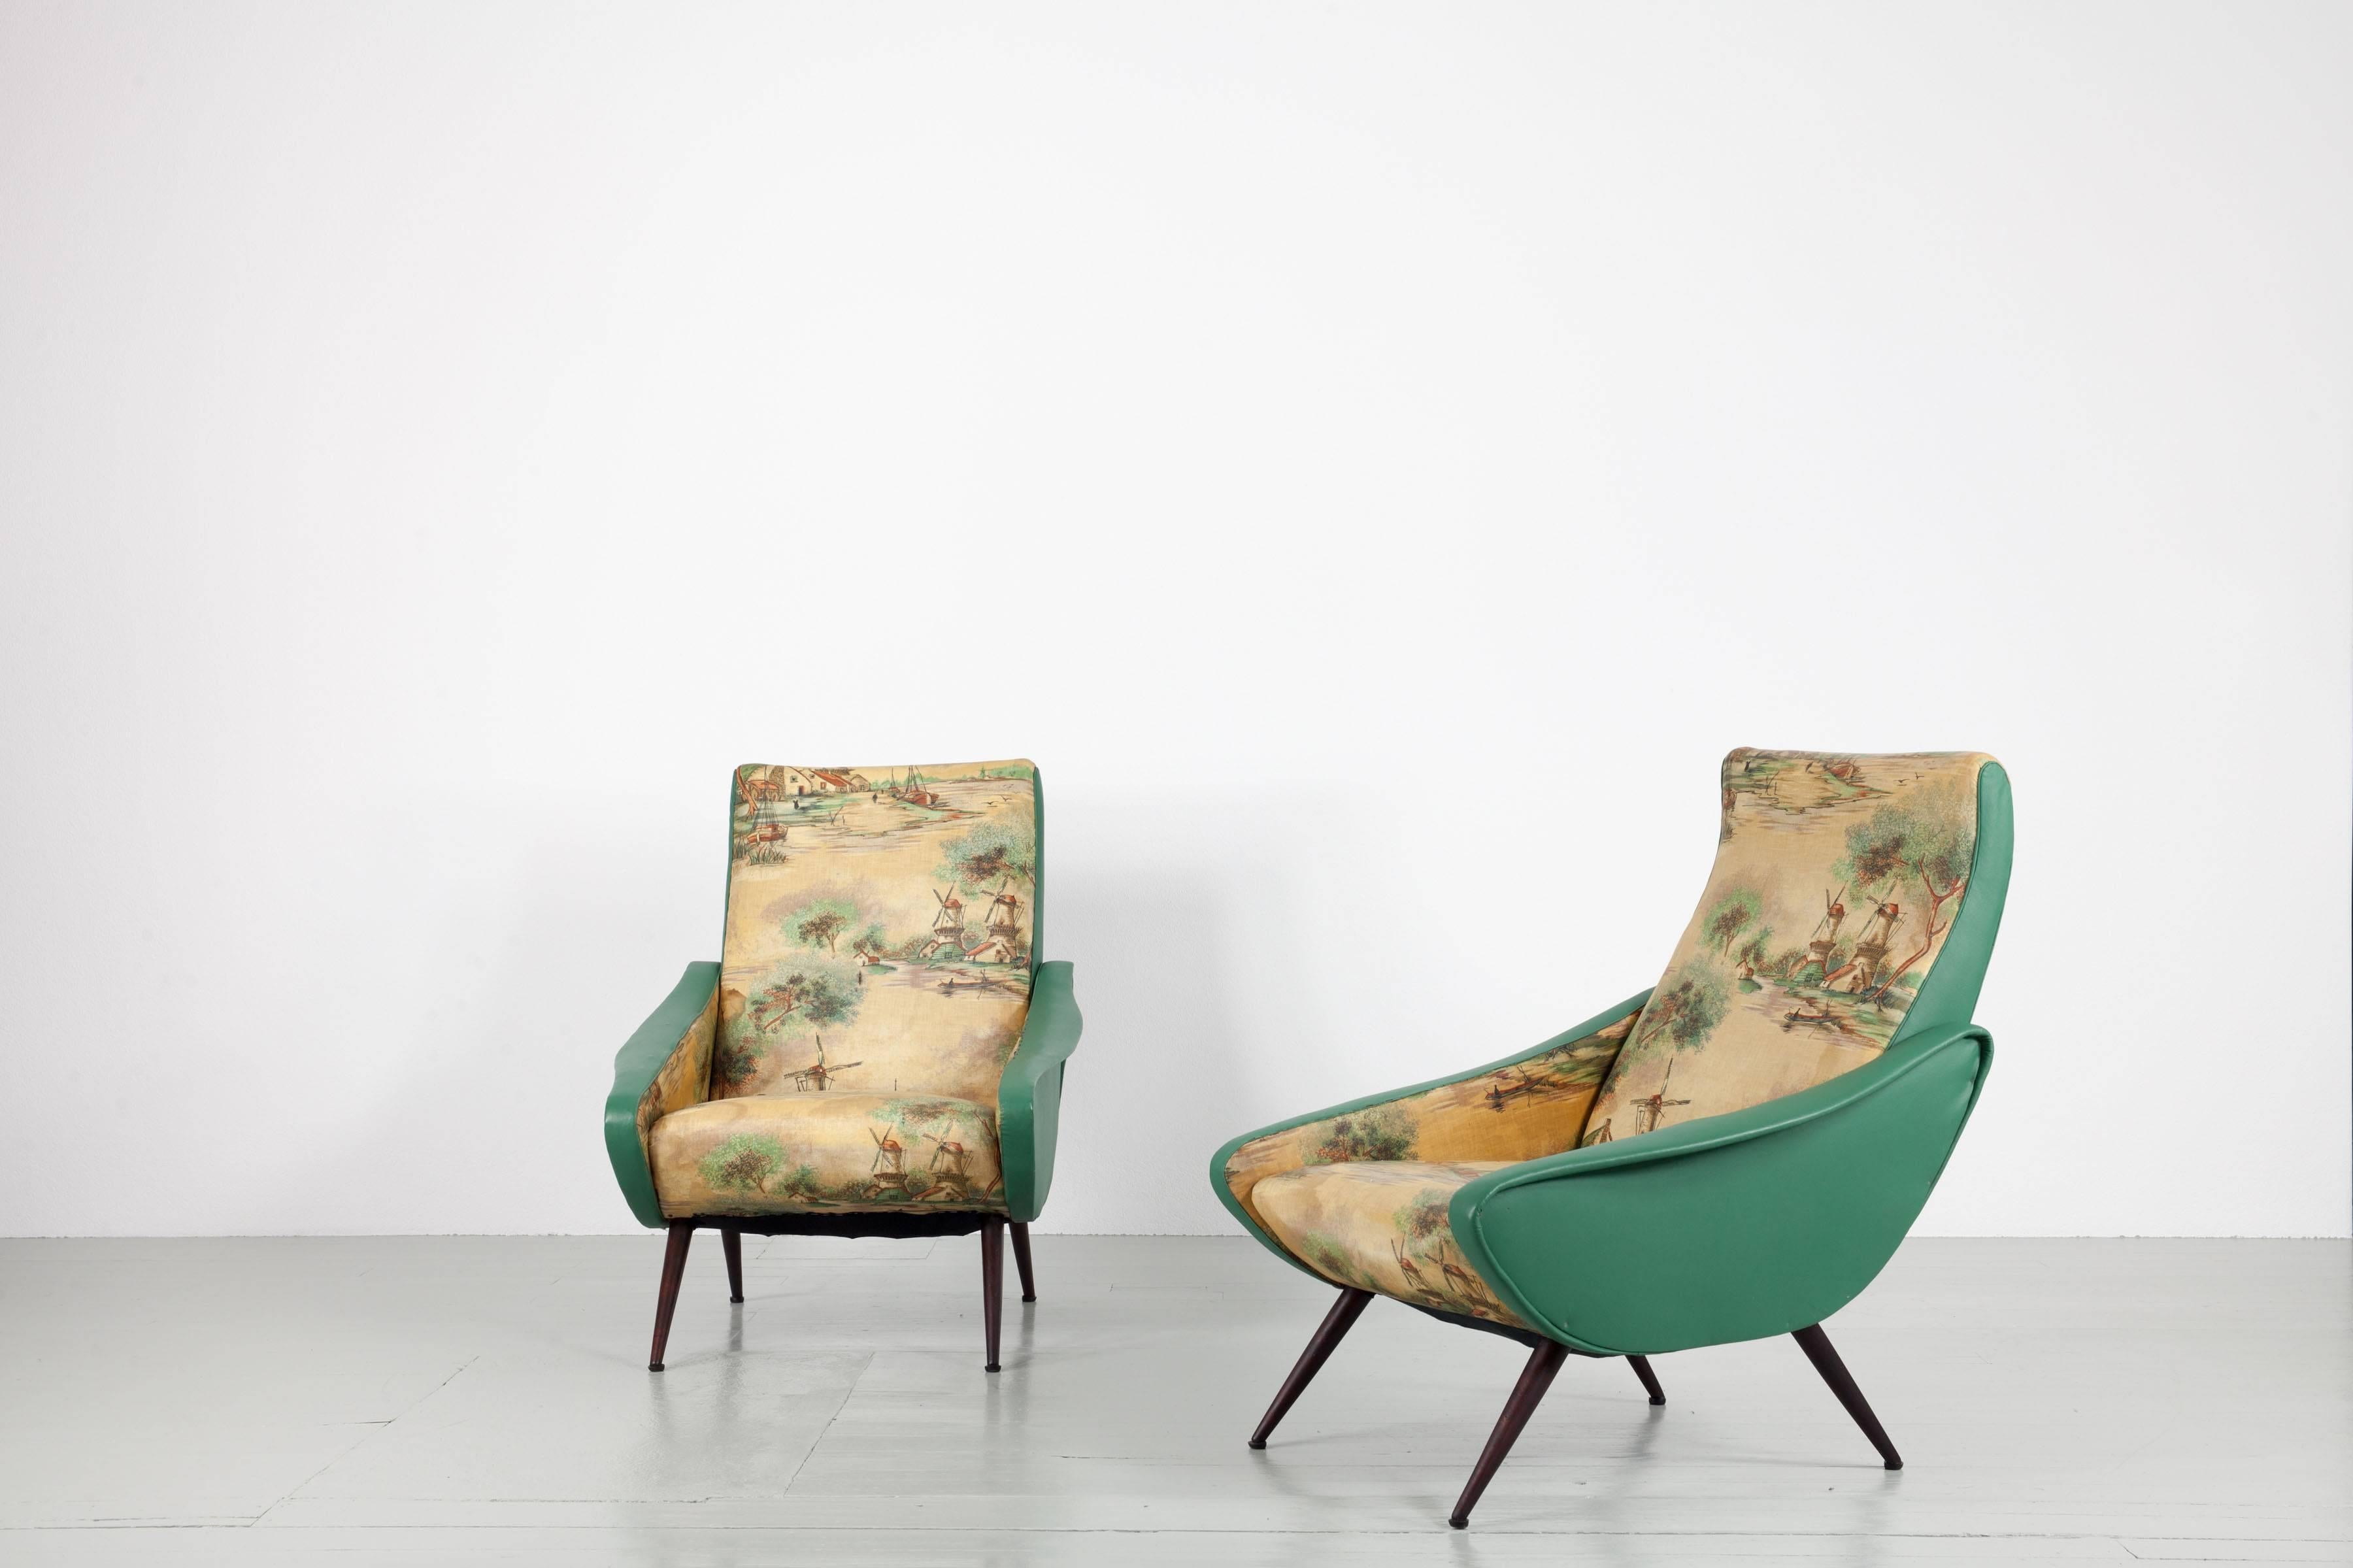 Set of 2 Italian Chairs, Two-Tone Cover, Turquoise and Landscape Motive, 1950s For Sale 4